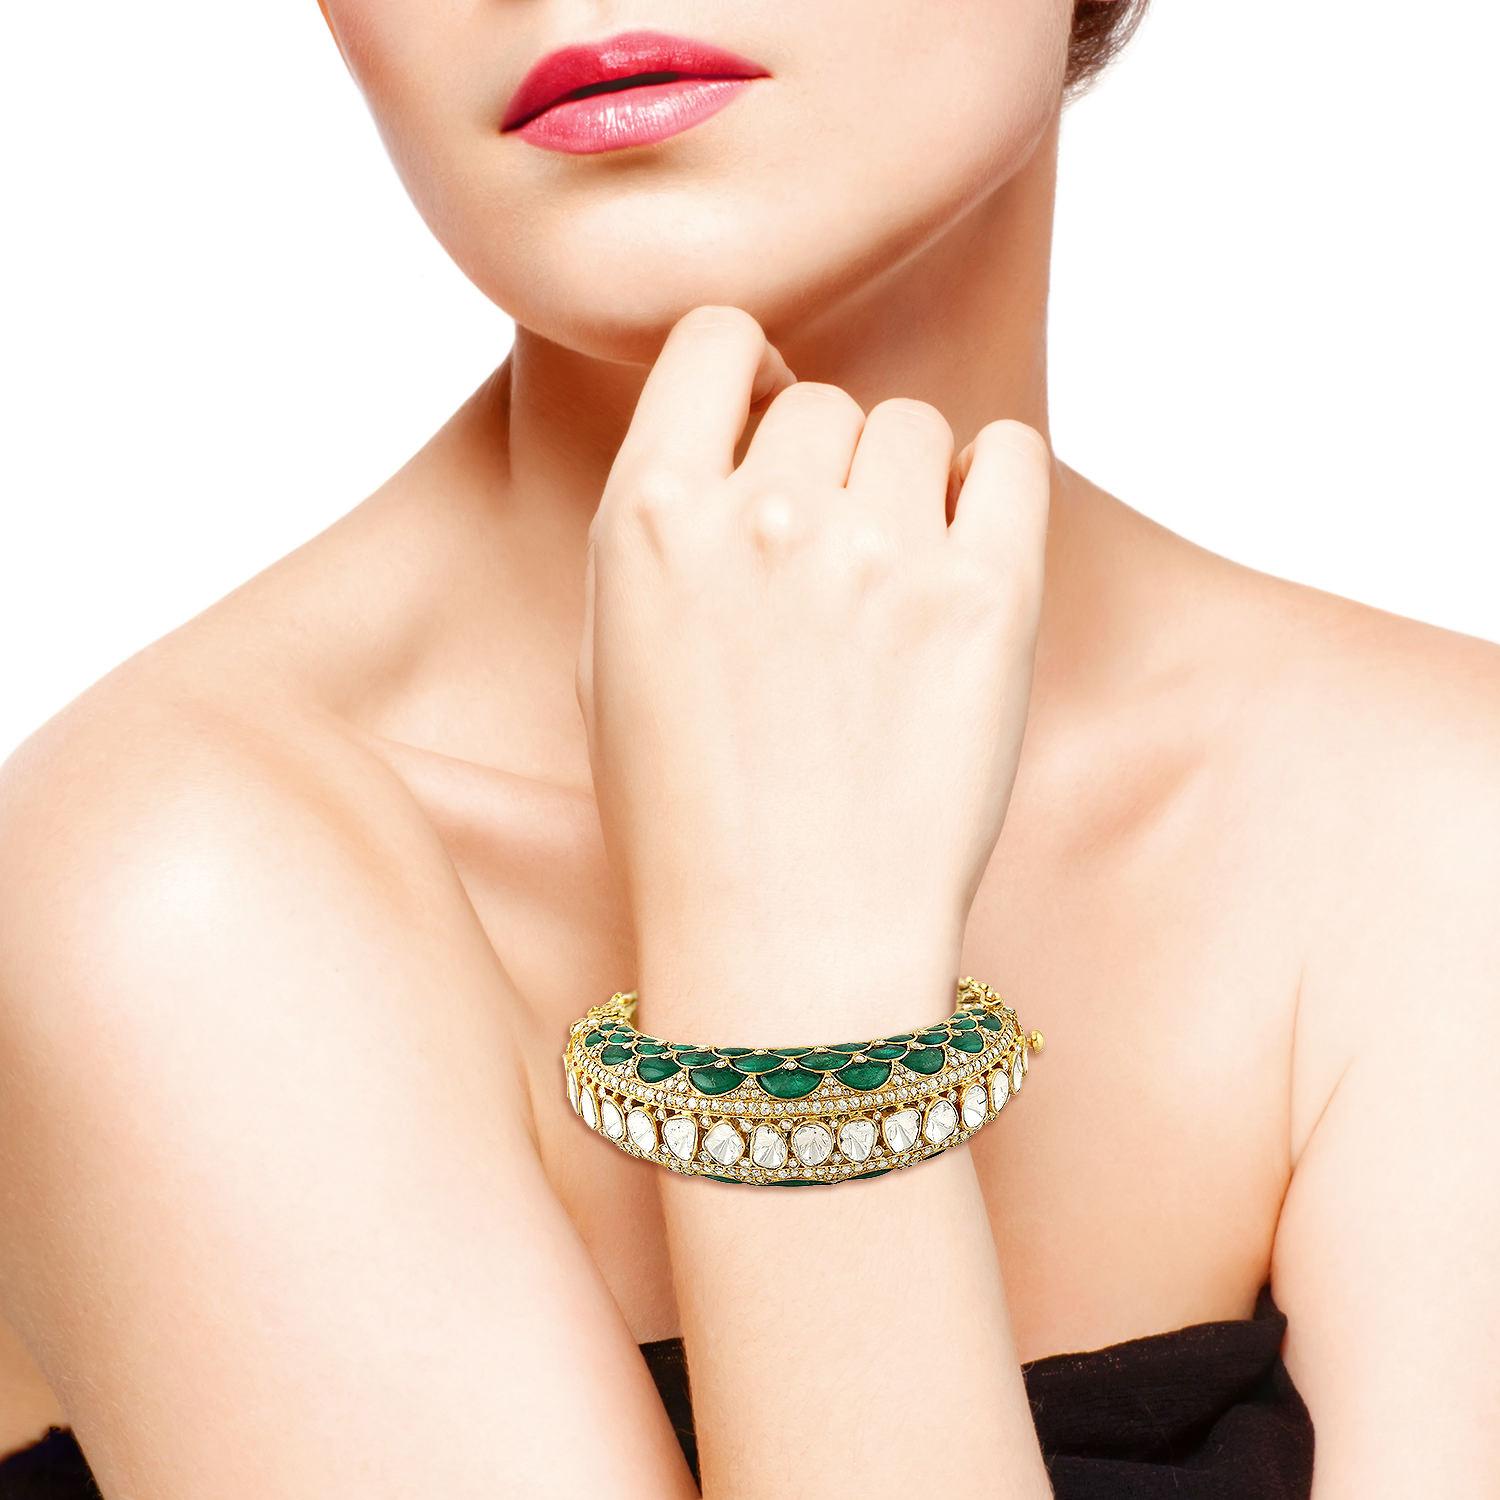 A stunning bangle bracelet handmade in 14K gold.  It is set in 28.95 carats emerald and 11.85 carats rose cut diamonds. Clasp Closure.

FOLLOW  MEGHNA JEWELS storefront to view the latest collection & exclusive pieces.  Meghna Jewels is proudly